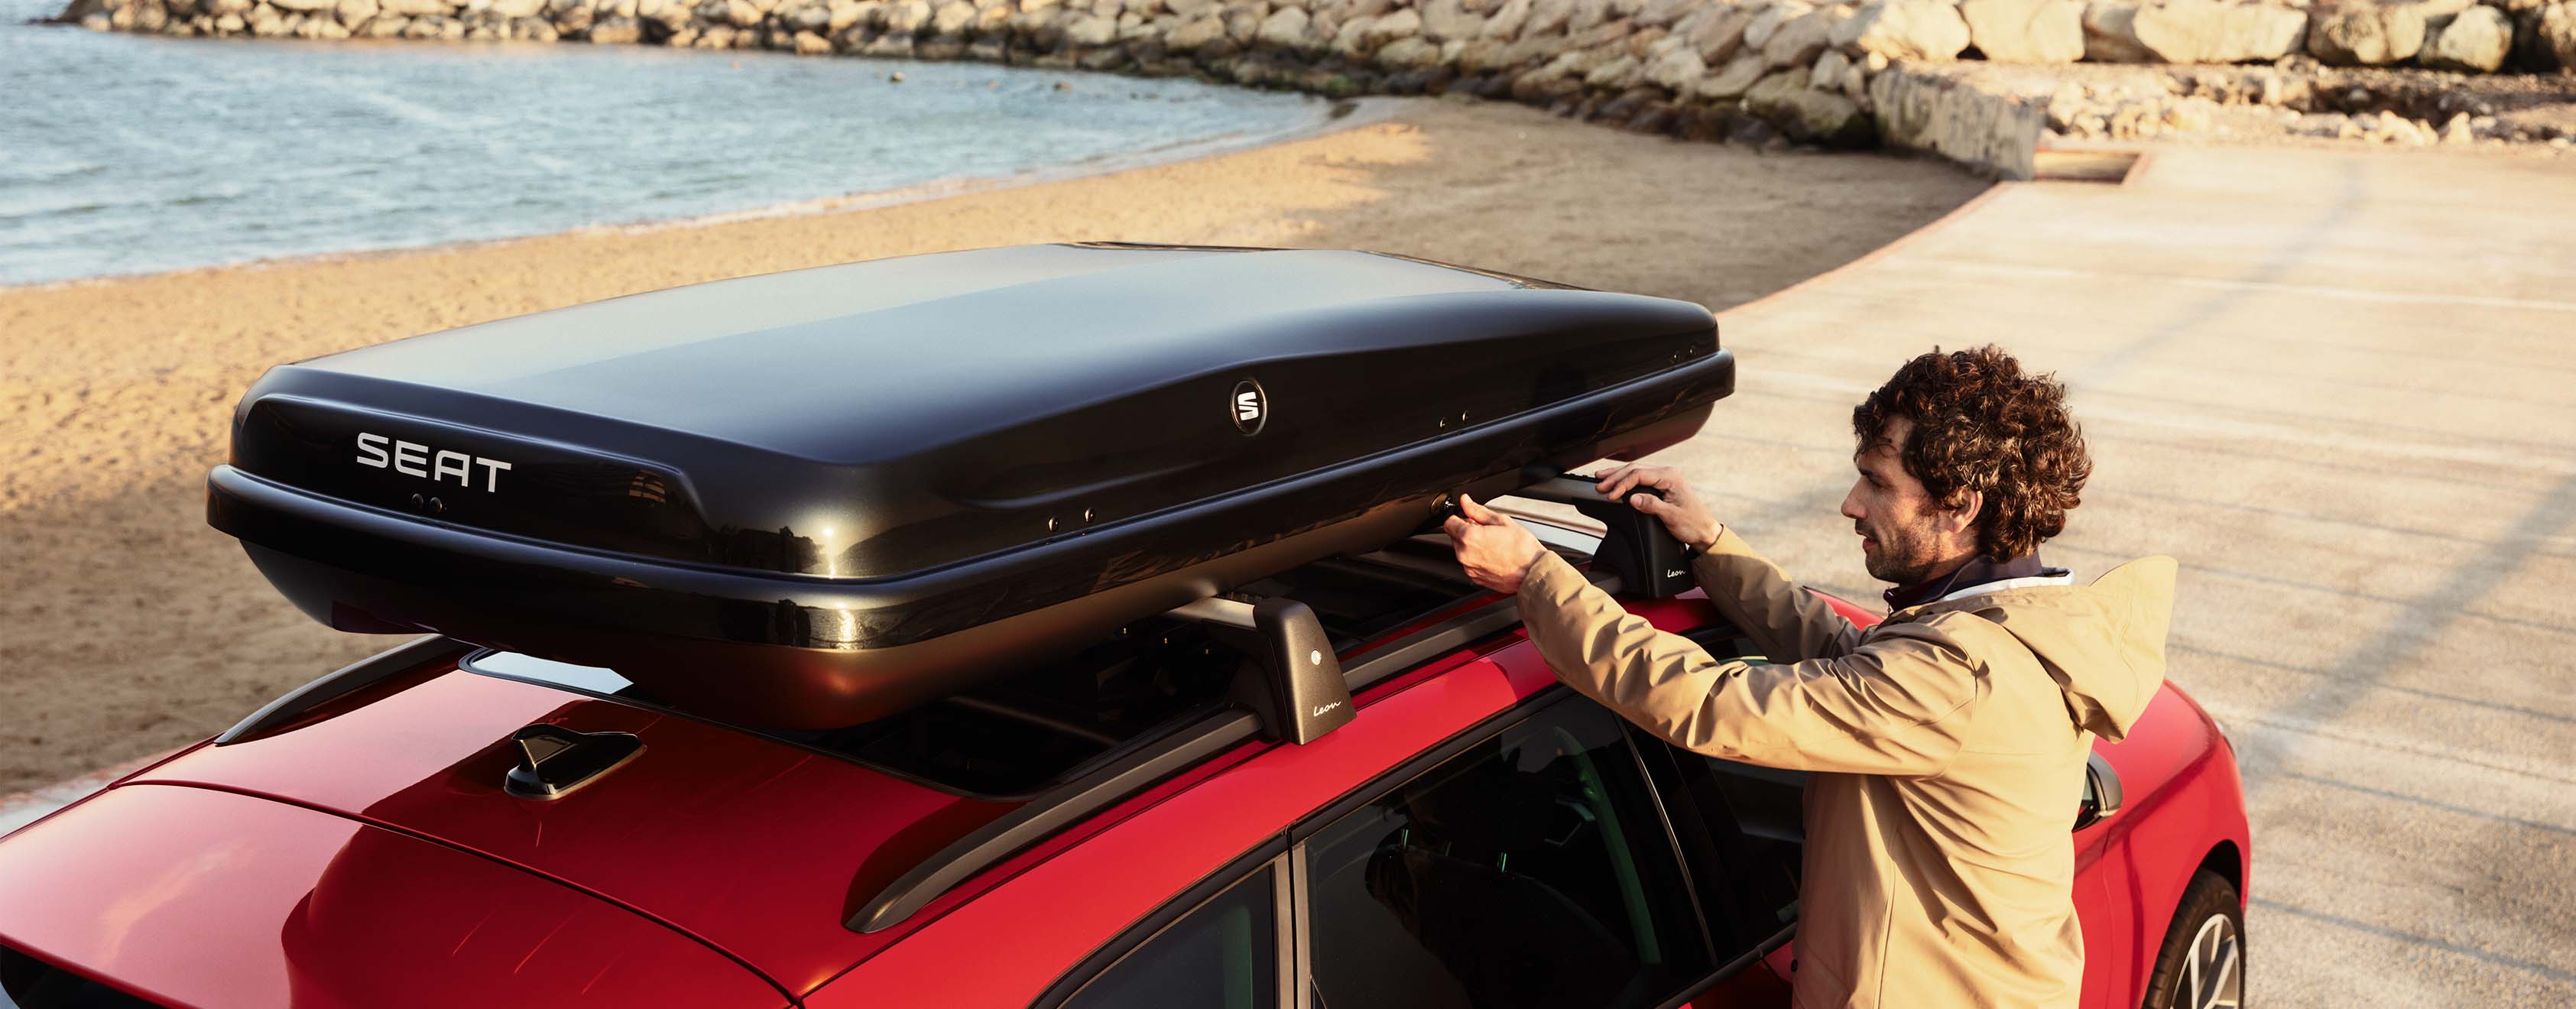 seat leon accessories roof box with 400 or 600 litre capacity options